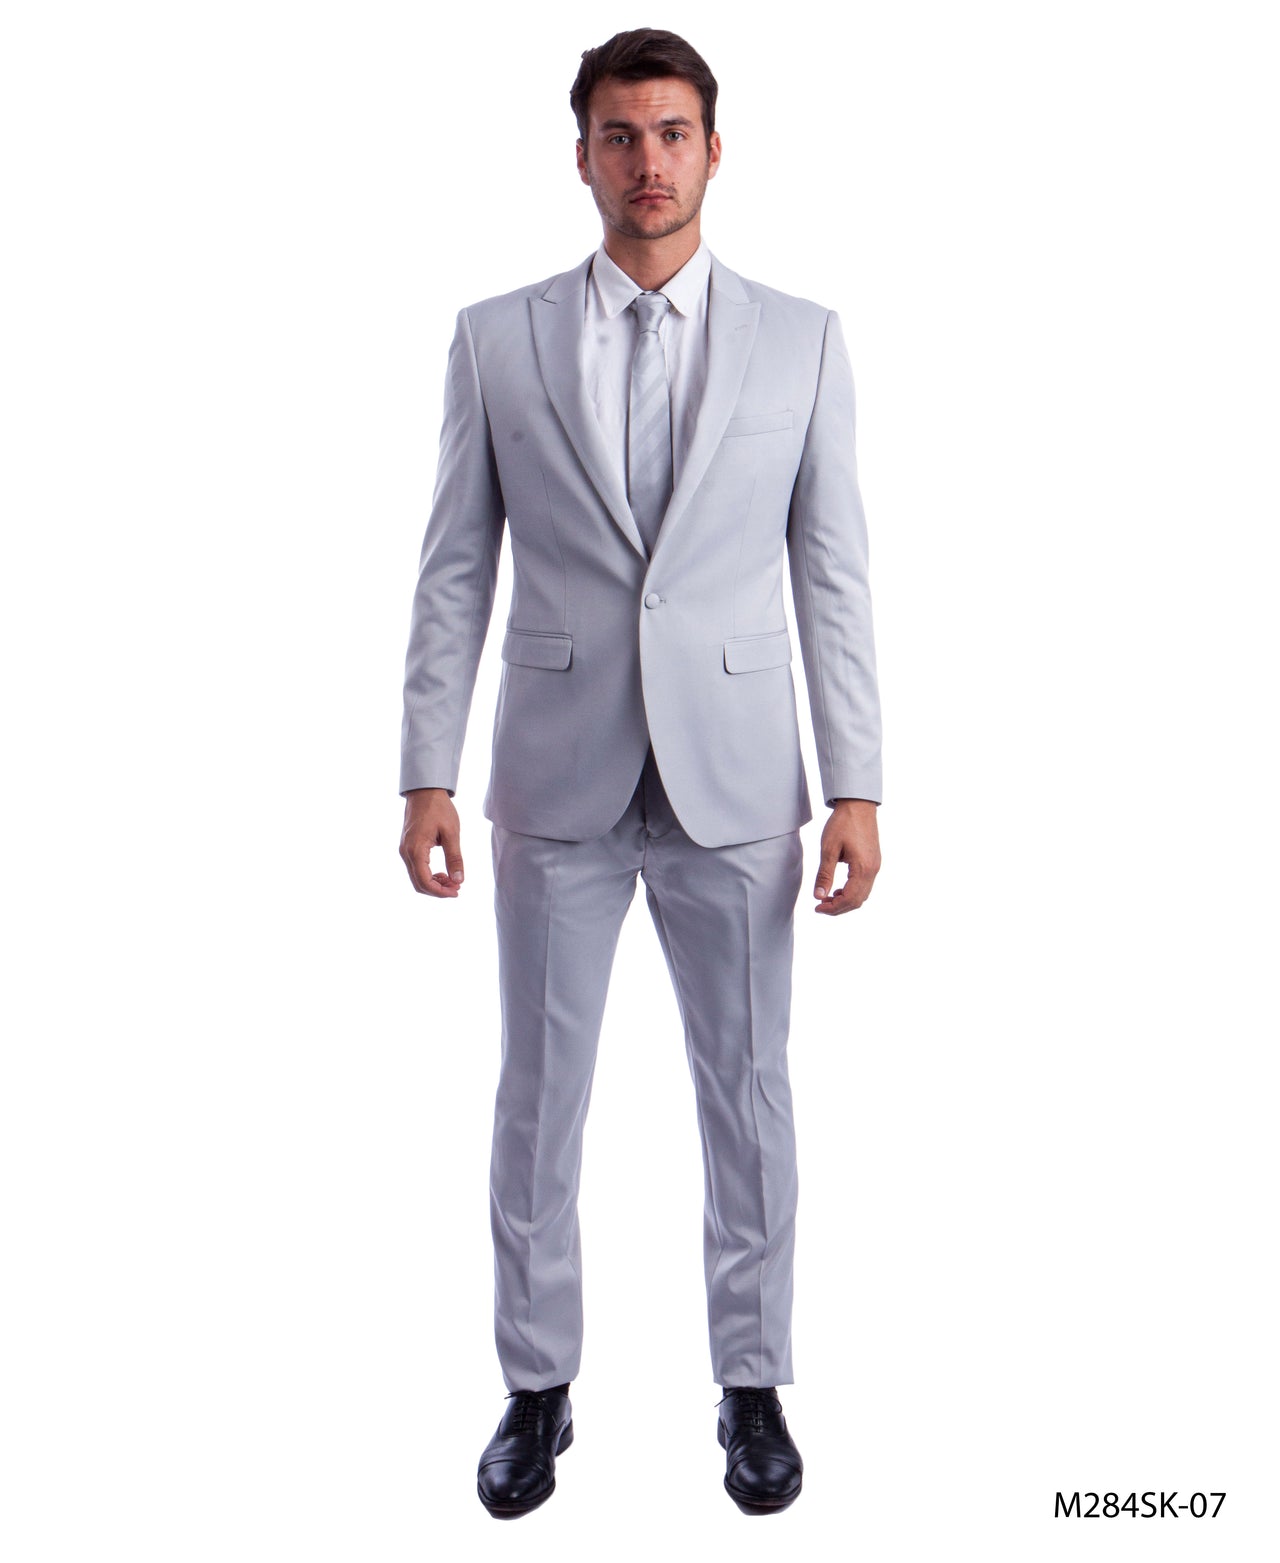 Lt.Gray Suit For Men Formal Suits For All Ocassions - Hattitude